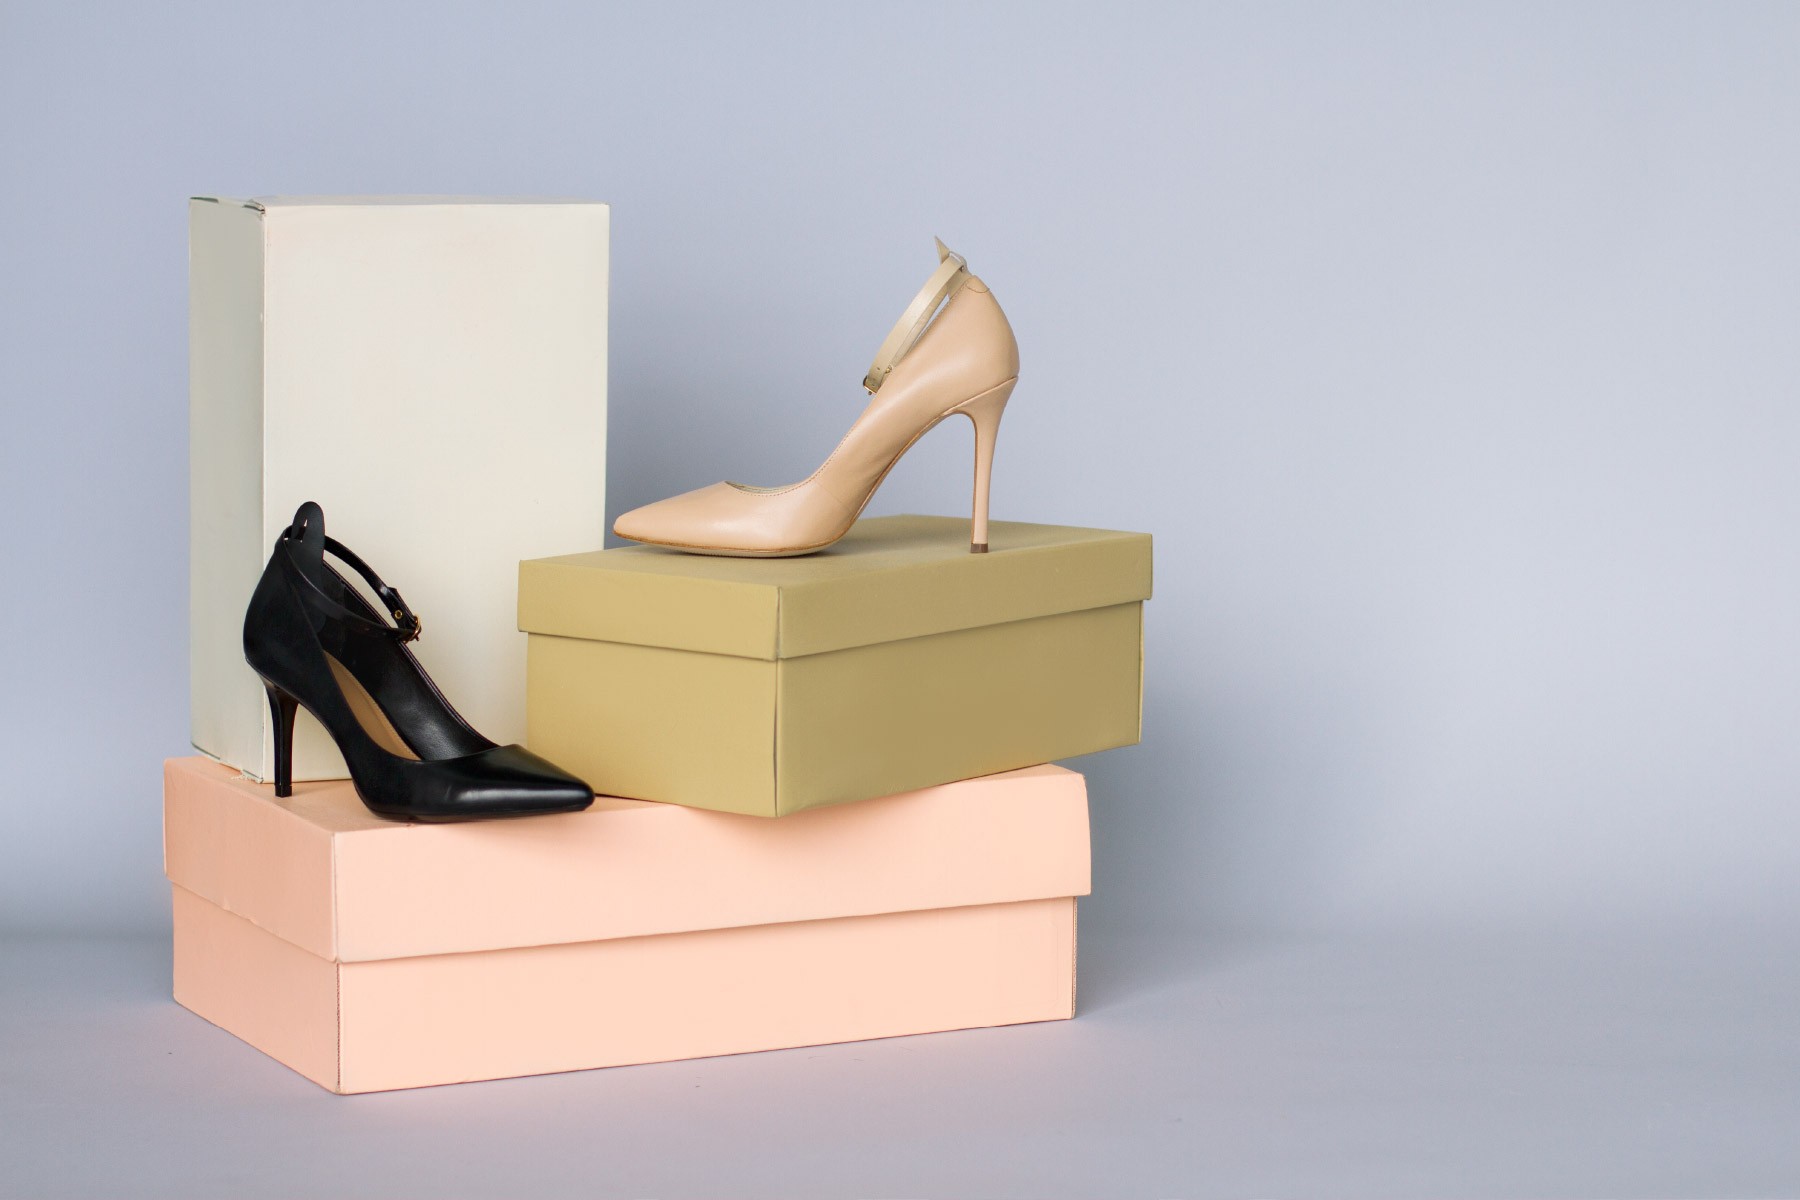 Fuze-Branding-Small-Business-Lifestyle-Product-Photography-Ginger-Straps-Fashion-Solution-Brand-Nude-Black-Heels-On-Stacked-Boxes-With-Attachable-Ankle-Straps